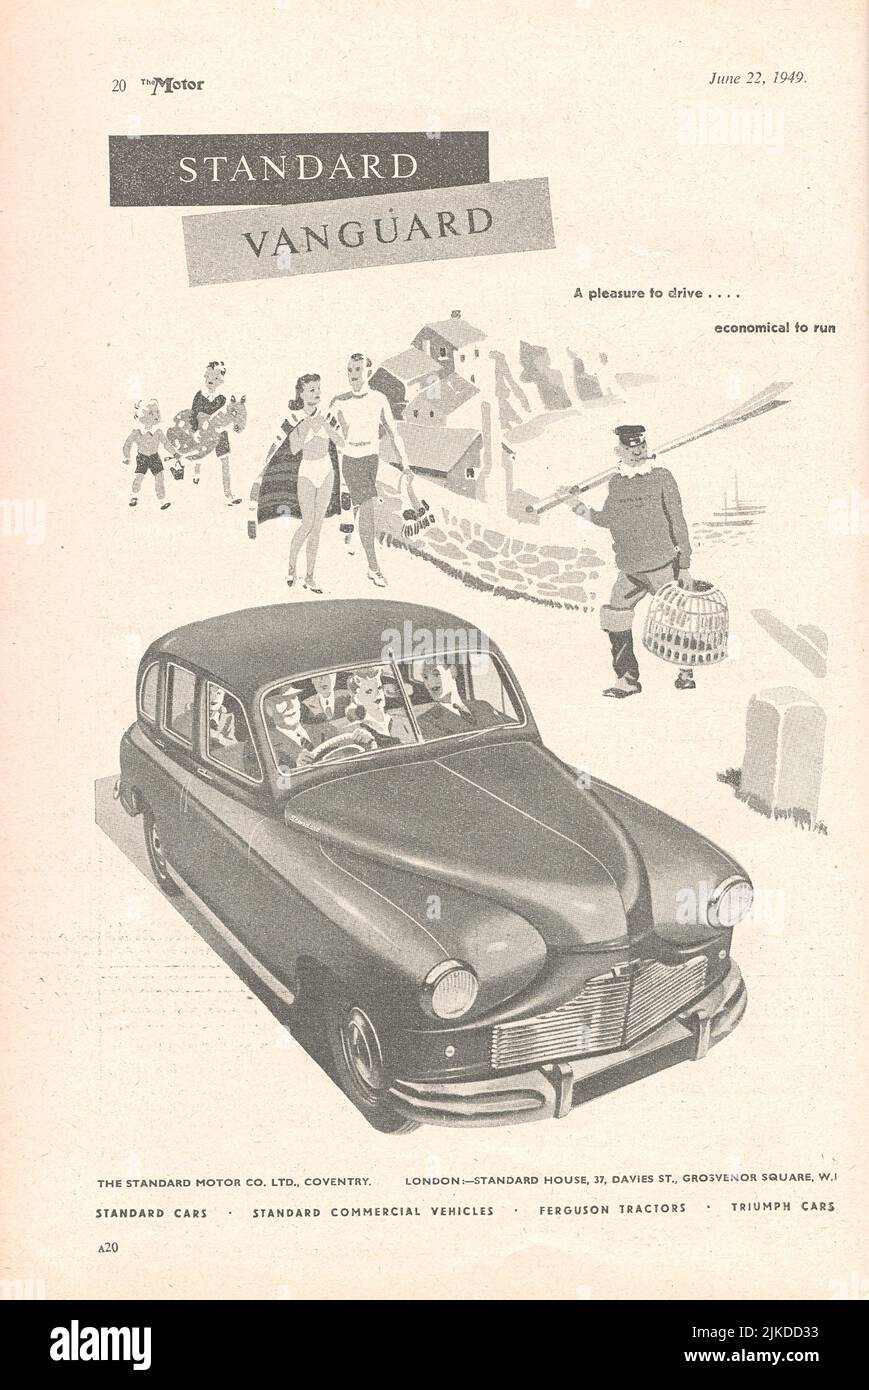 Standard Vanguard car old vintage advertisement from a UK car magazine 1949 Stock Photo